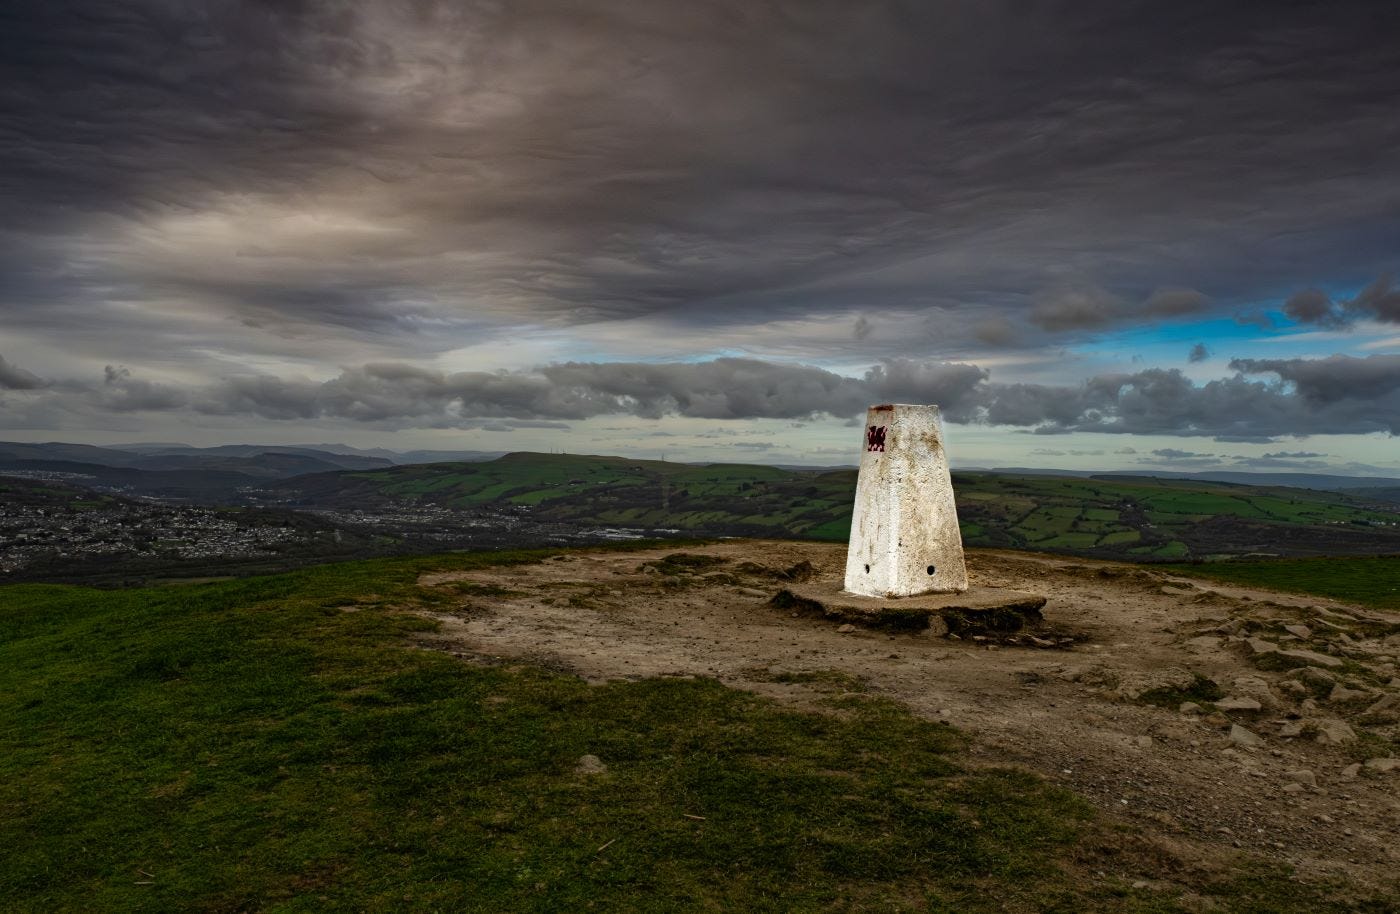 A trig point, which is a concrete block about four feet high and painted white, stands on top of a hill. The green grass of the hill is worn away around the trig point, exposing bare earth. A red dragon is stencilled on one side of the trig point. The sky is cloudy, dark and brooding.